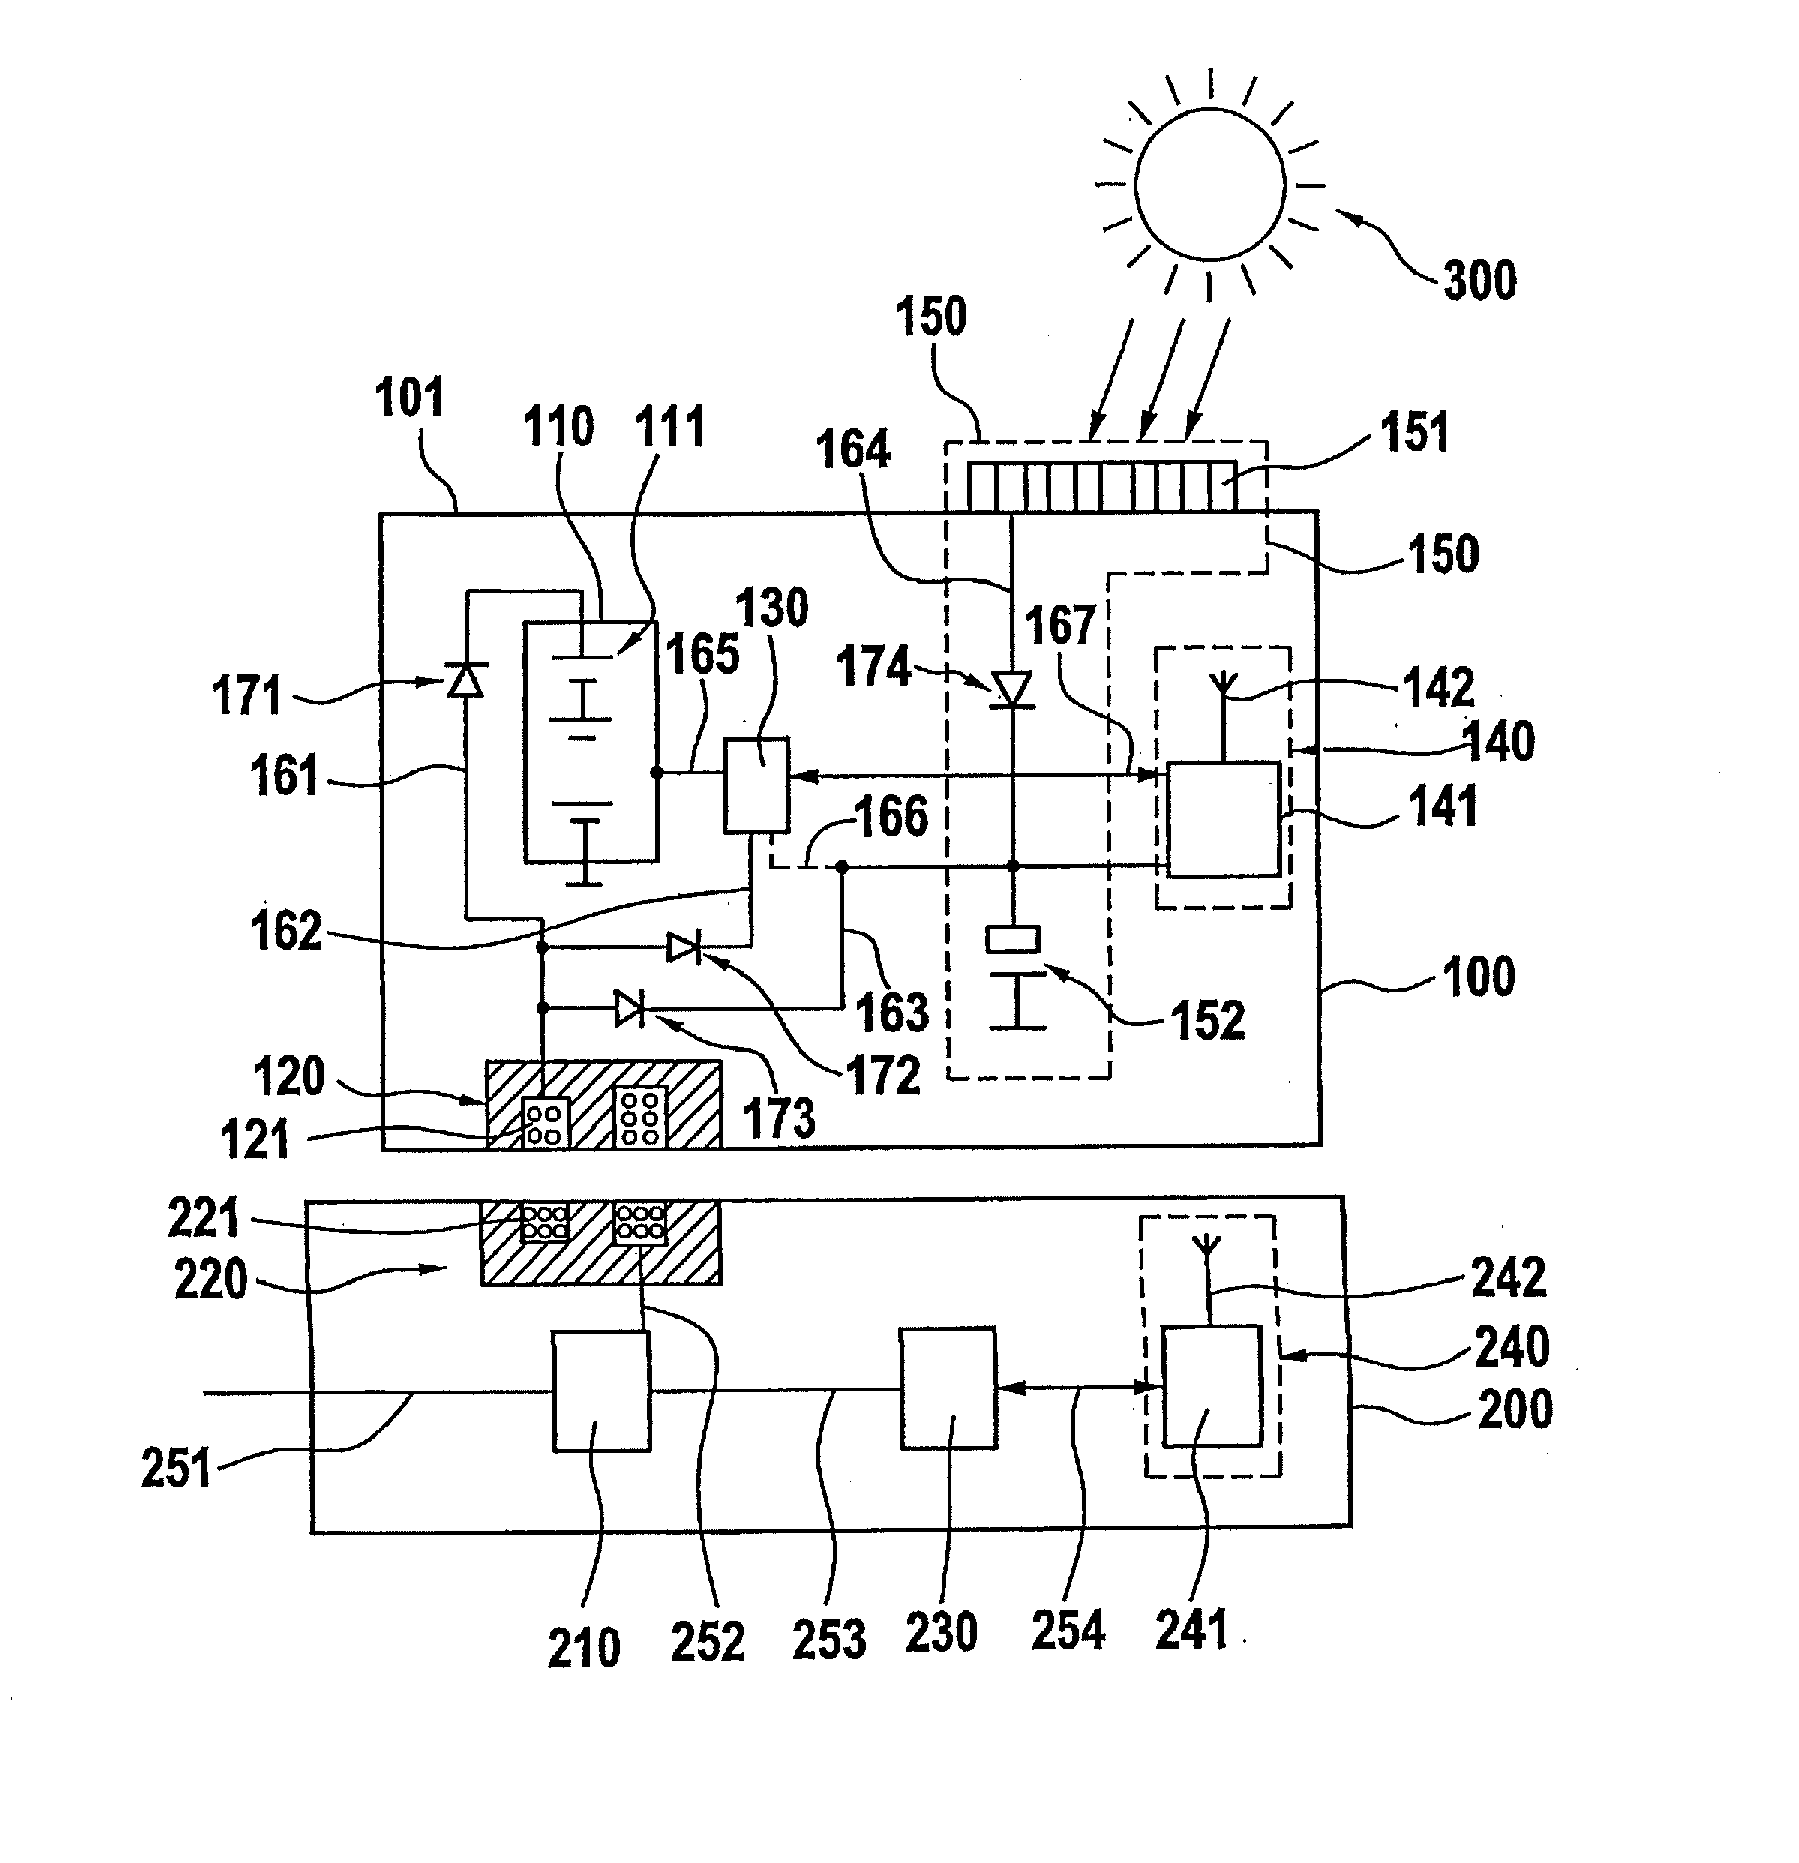 Battery pack having a separate power supply device for a wireless communication device of the battery pack